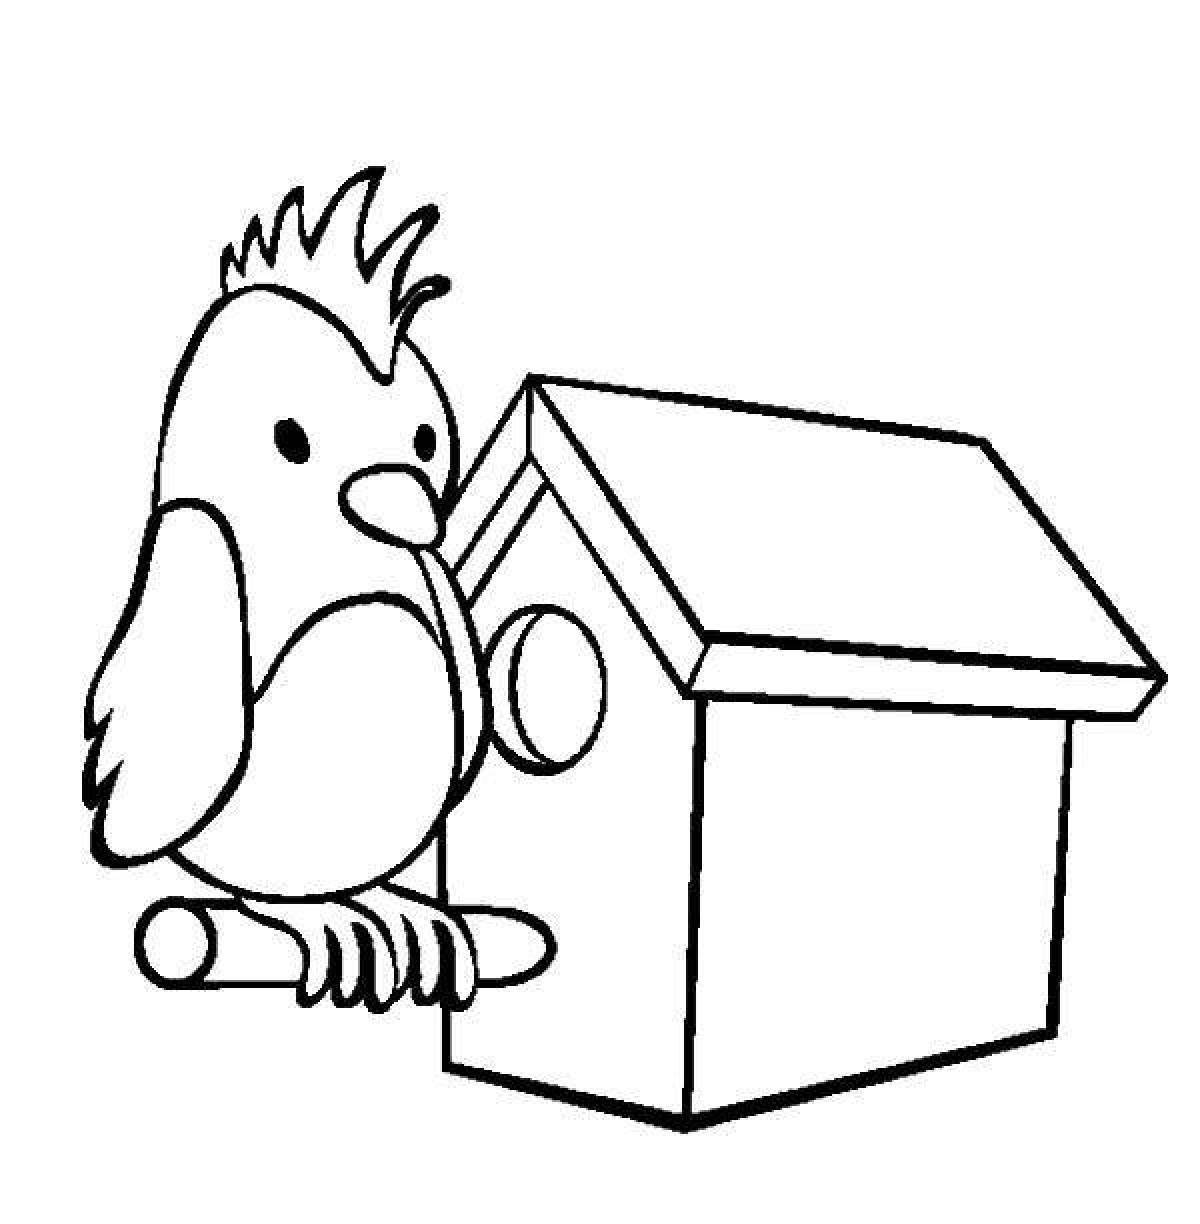 Coloring birdhouse for children